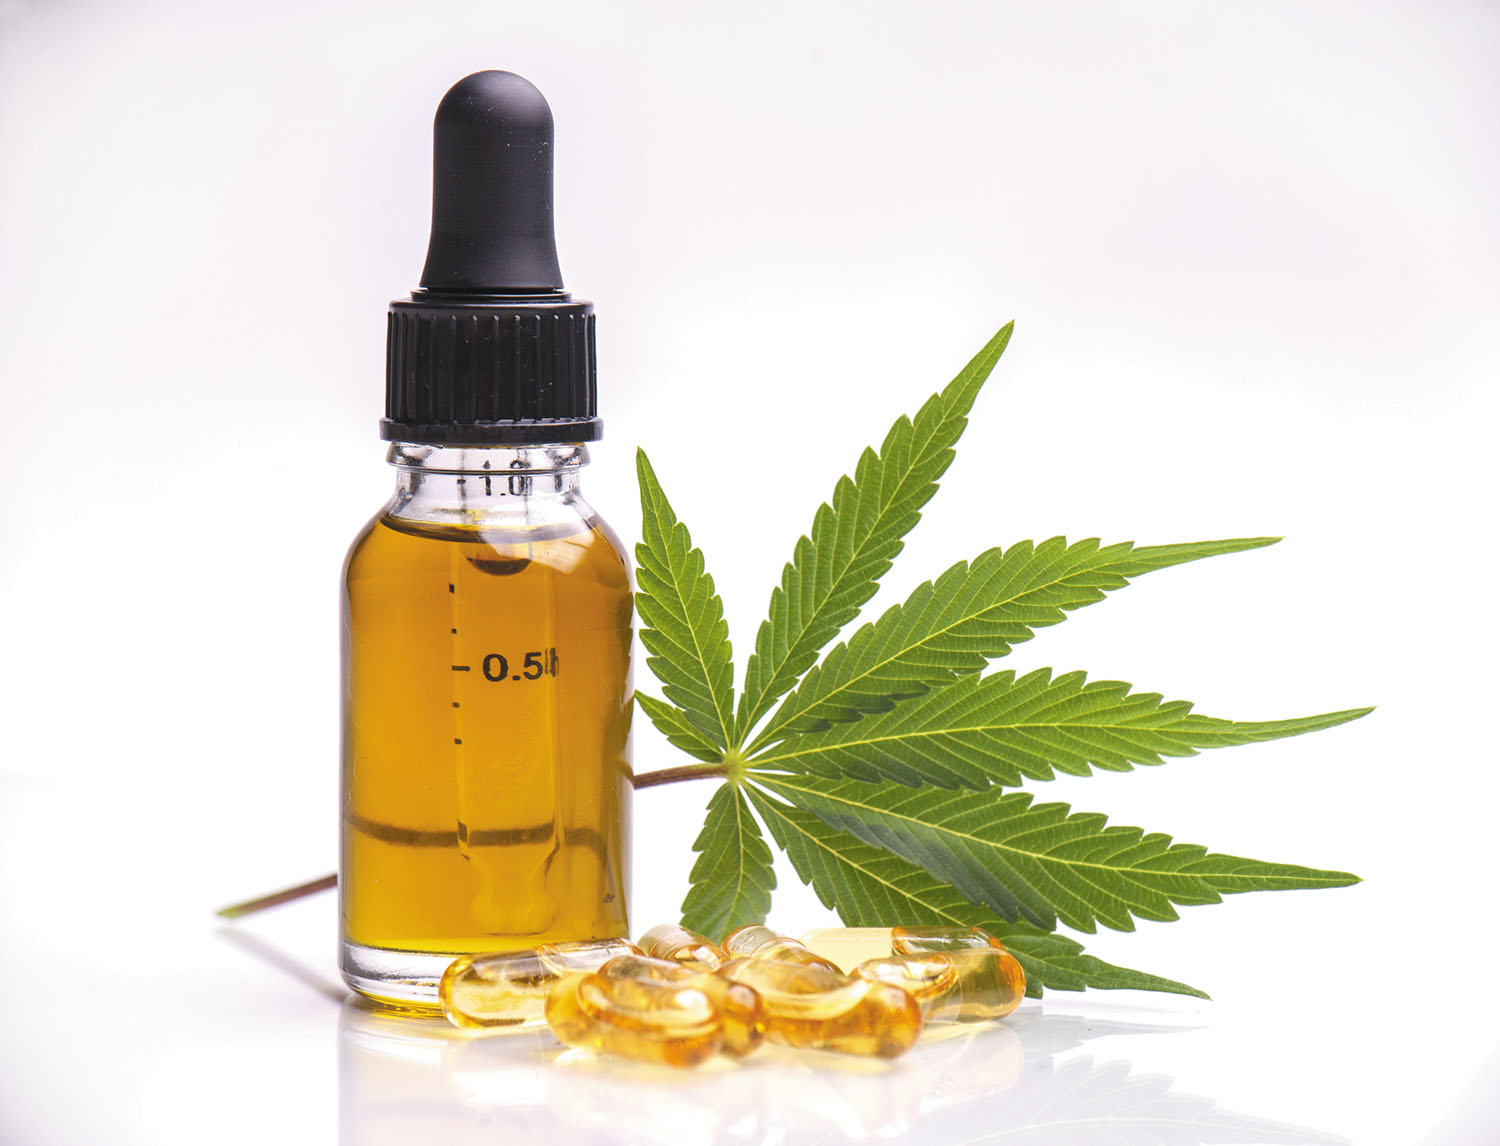 Know the facts about CBD products - Harvard Health